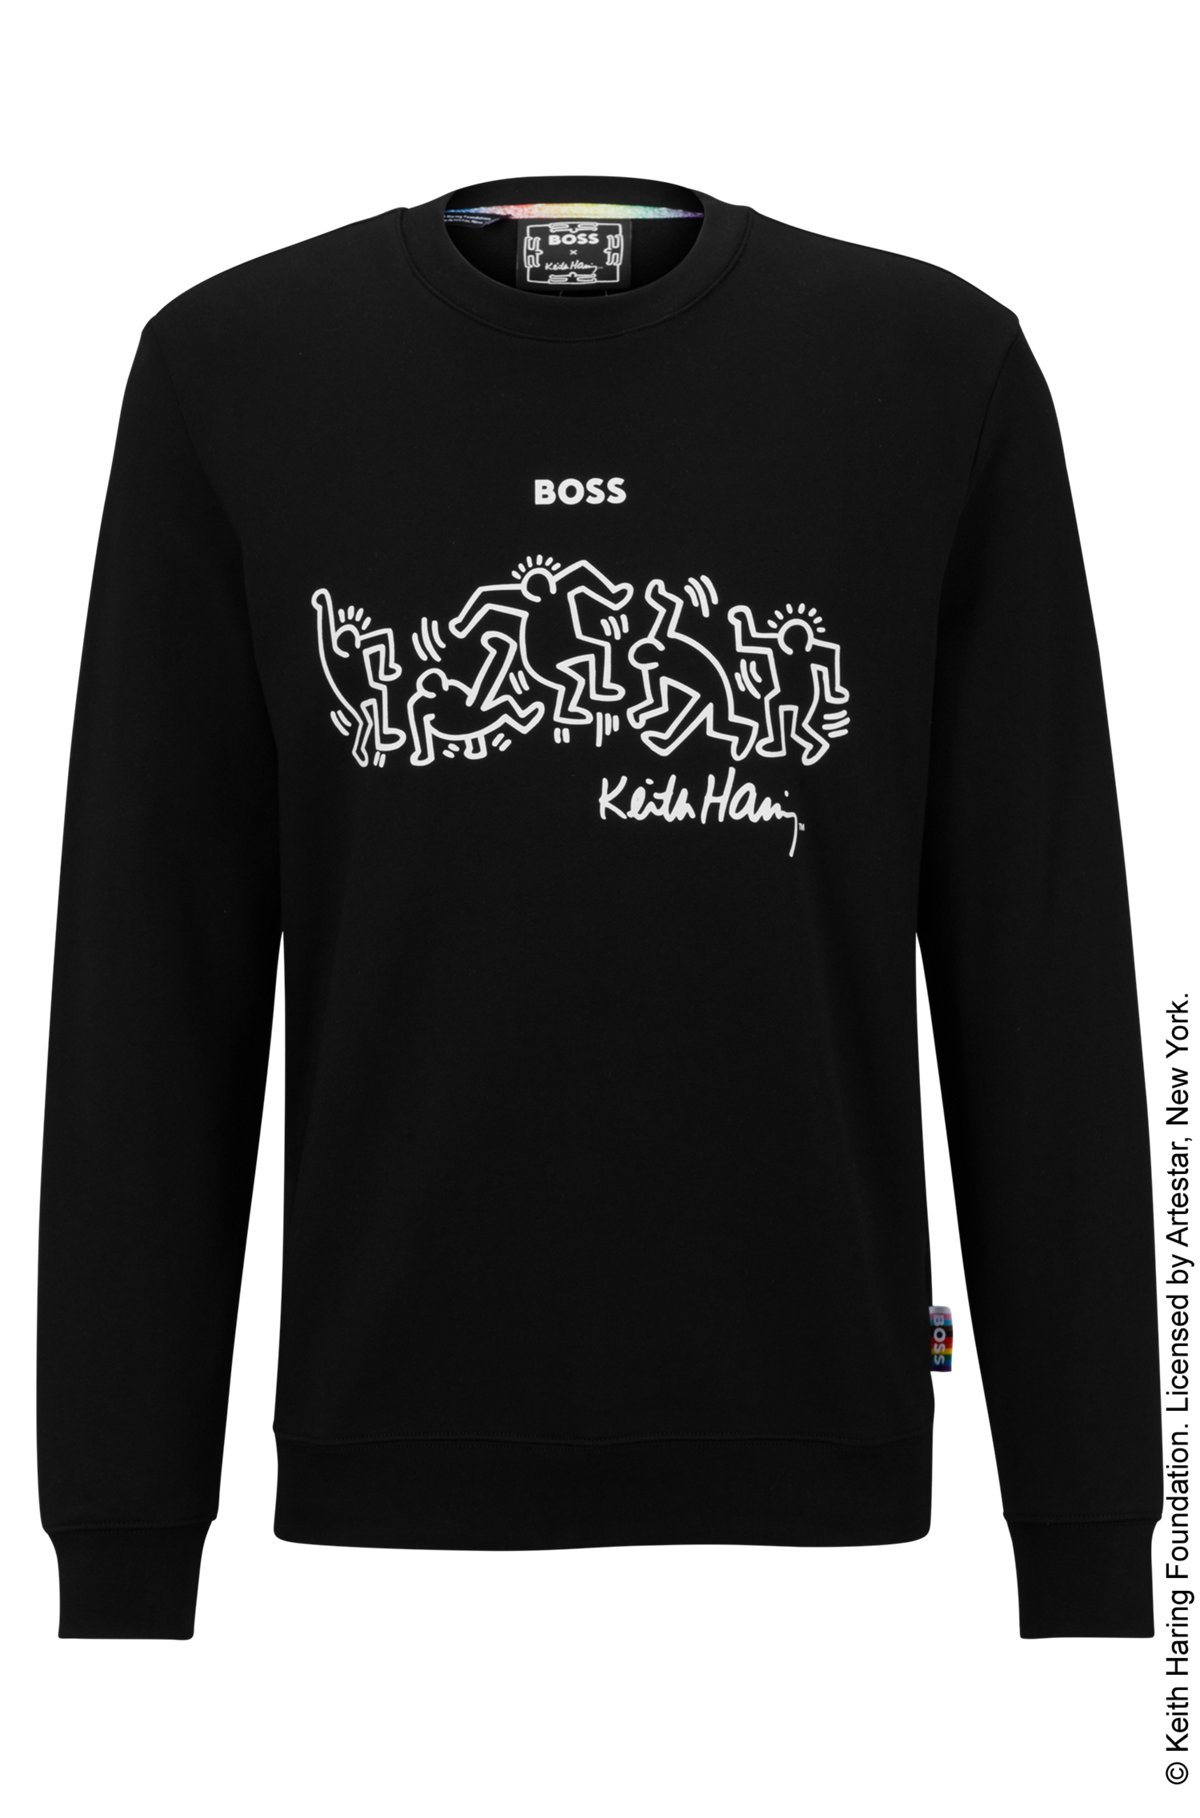 BOSS x Keith Haring gender-neutral cotton-blend sweatshirt with special artwork, Black